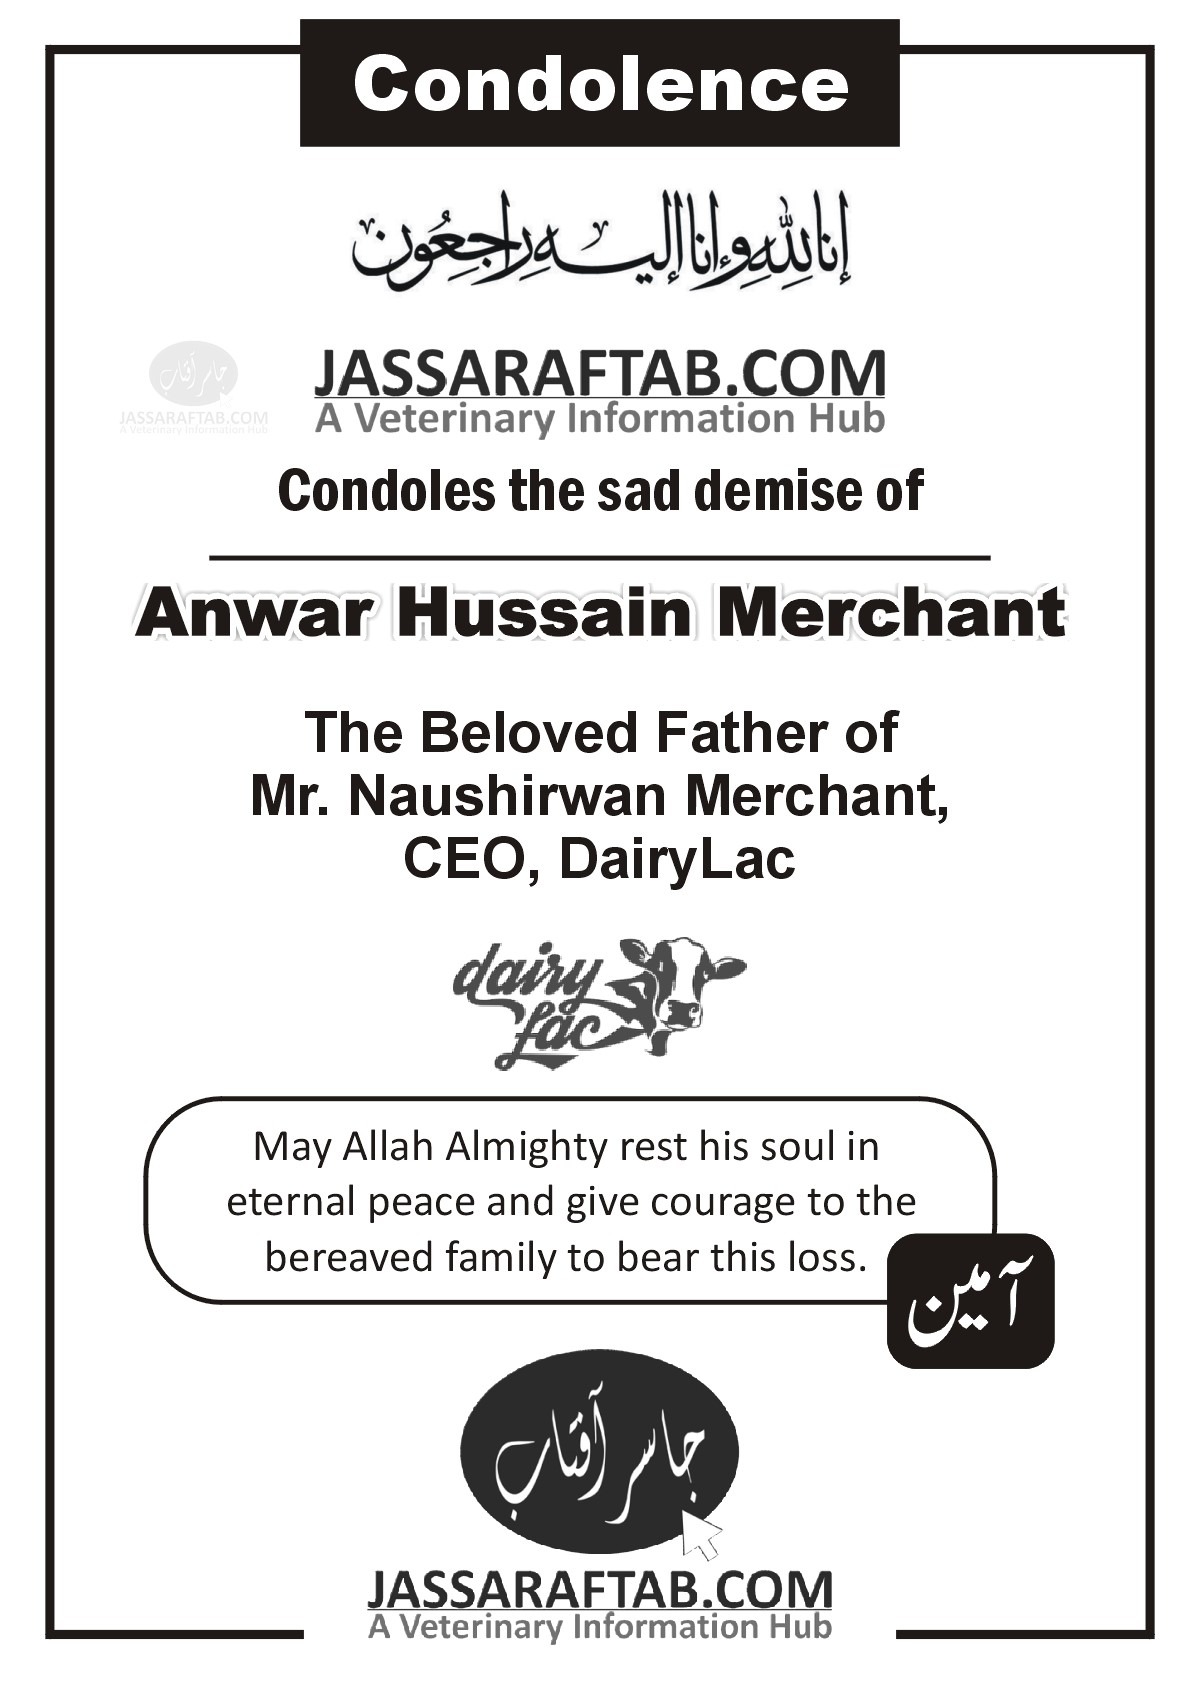 The sad demise of the father of nosherwan merchant, ceo dairy lac